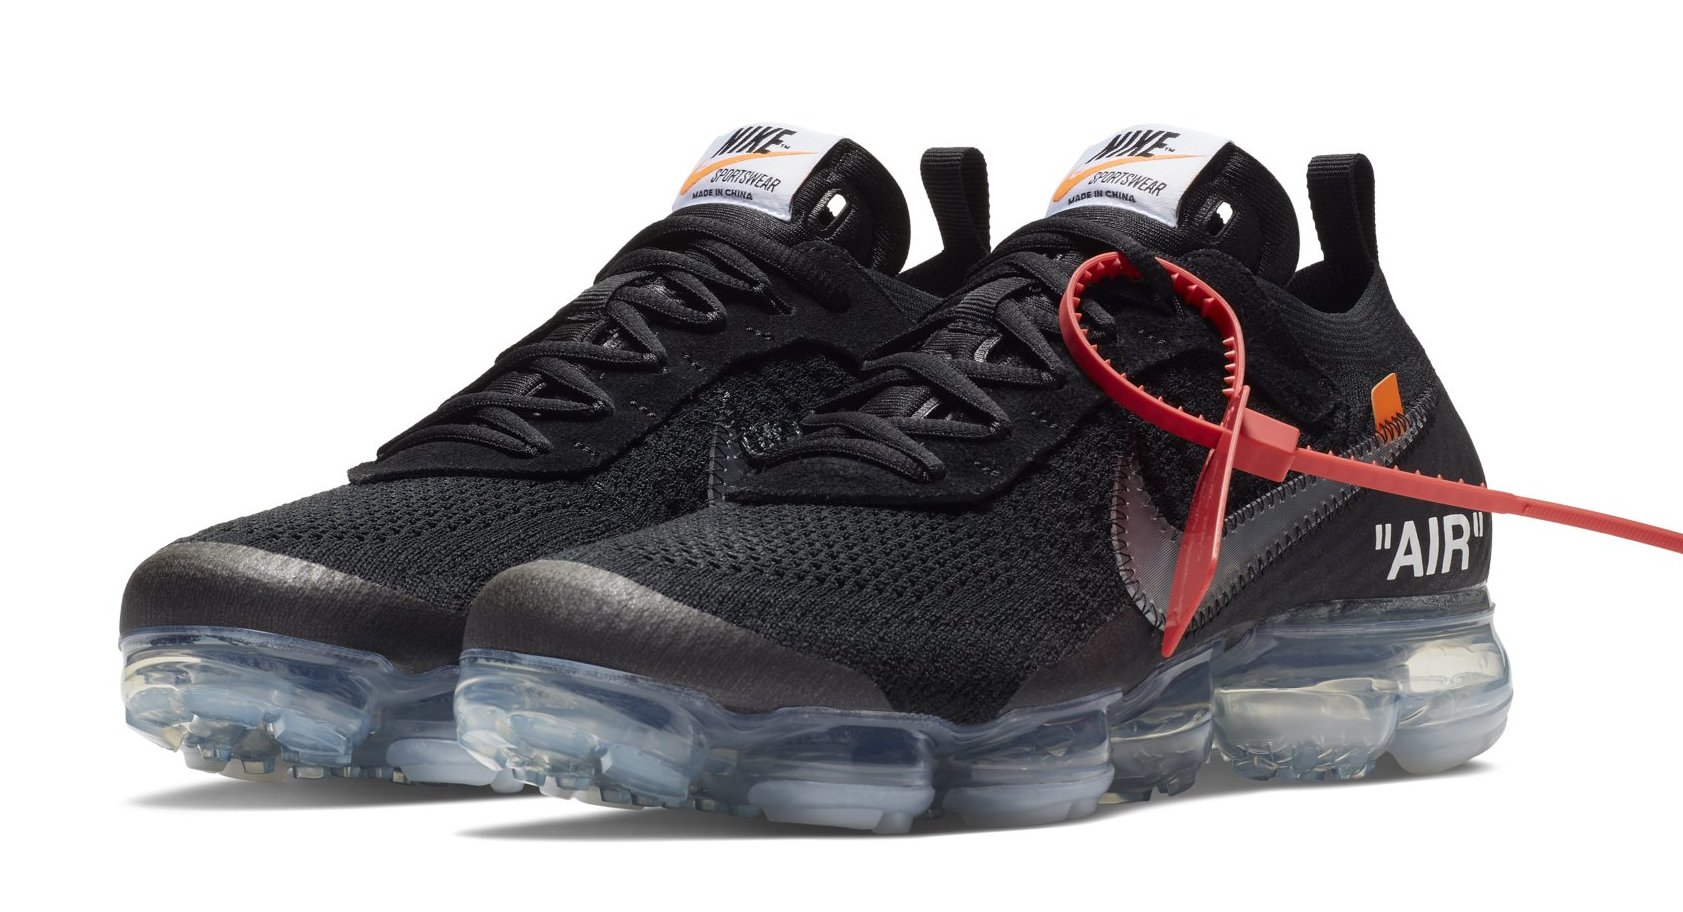 dvs. Foran dig Memo Nike's Making It Even Harder to Get the Off-White x VaporMax | Complex